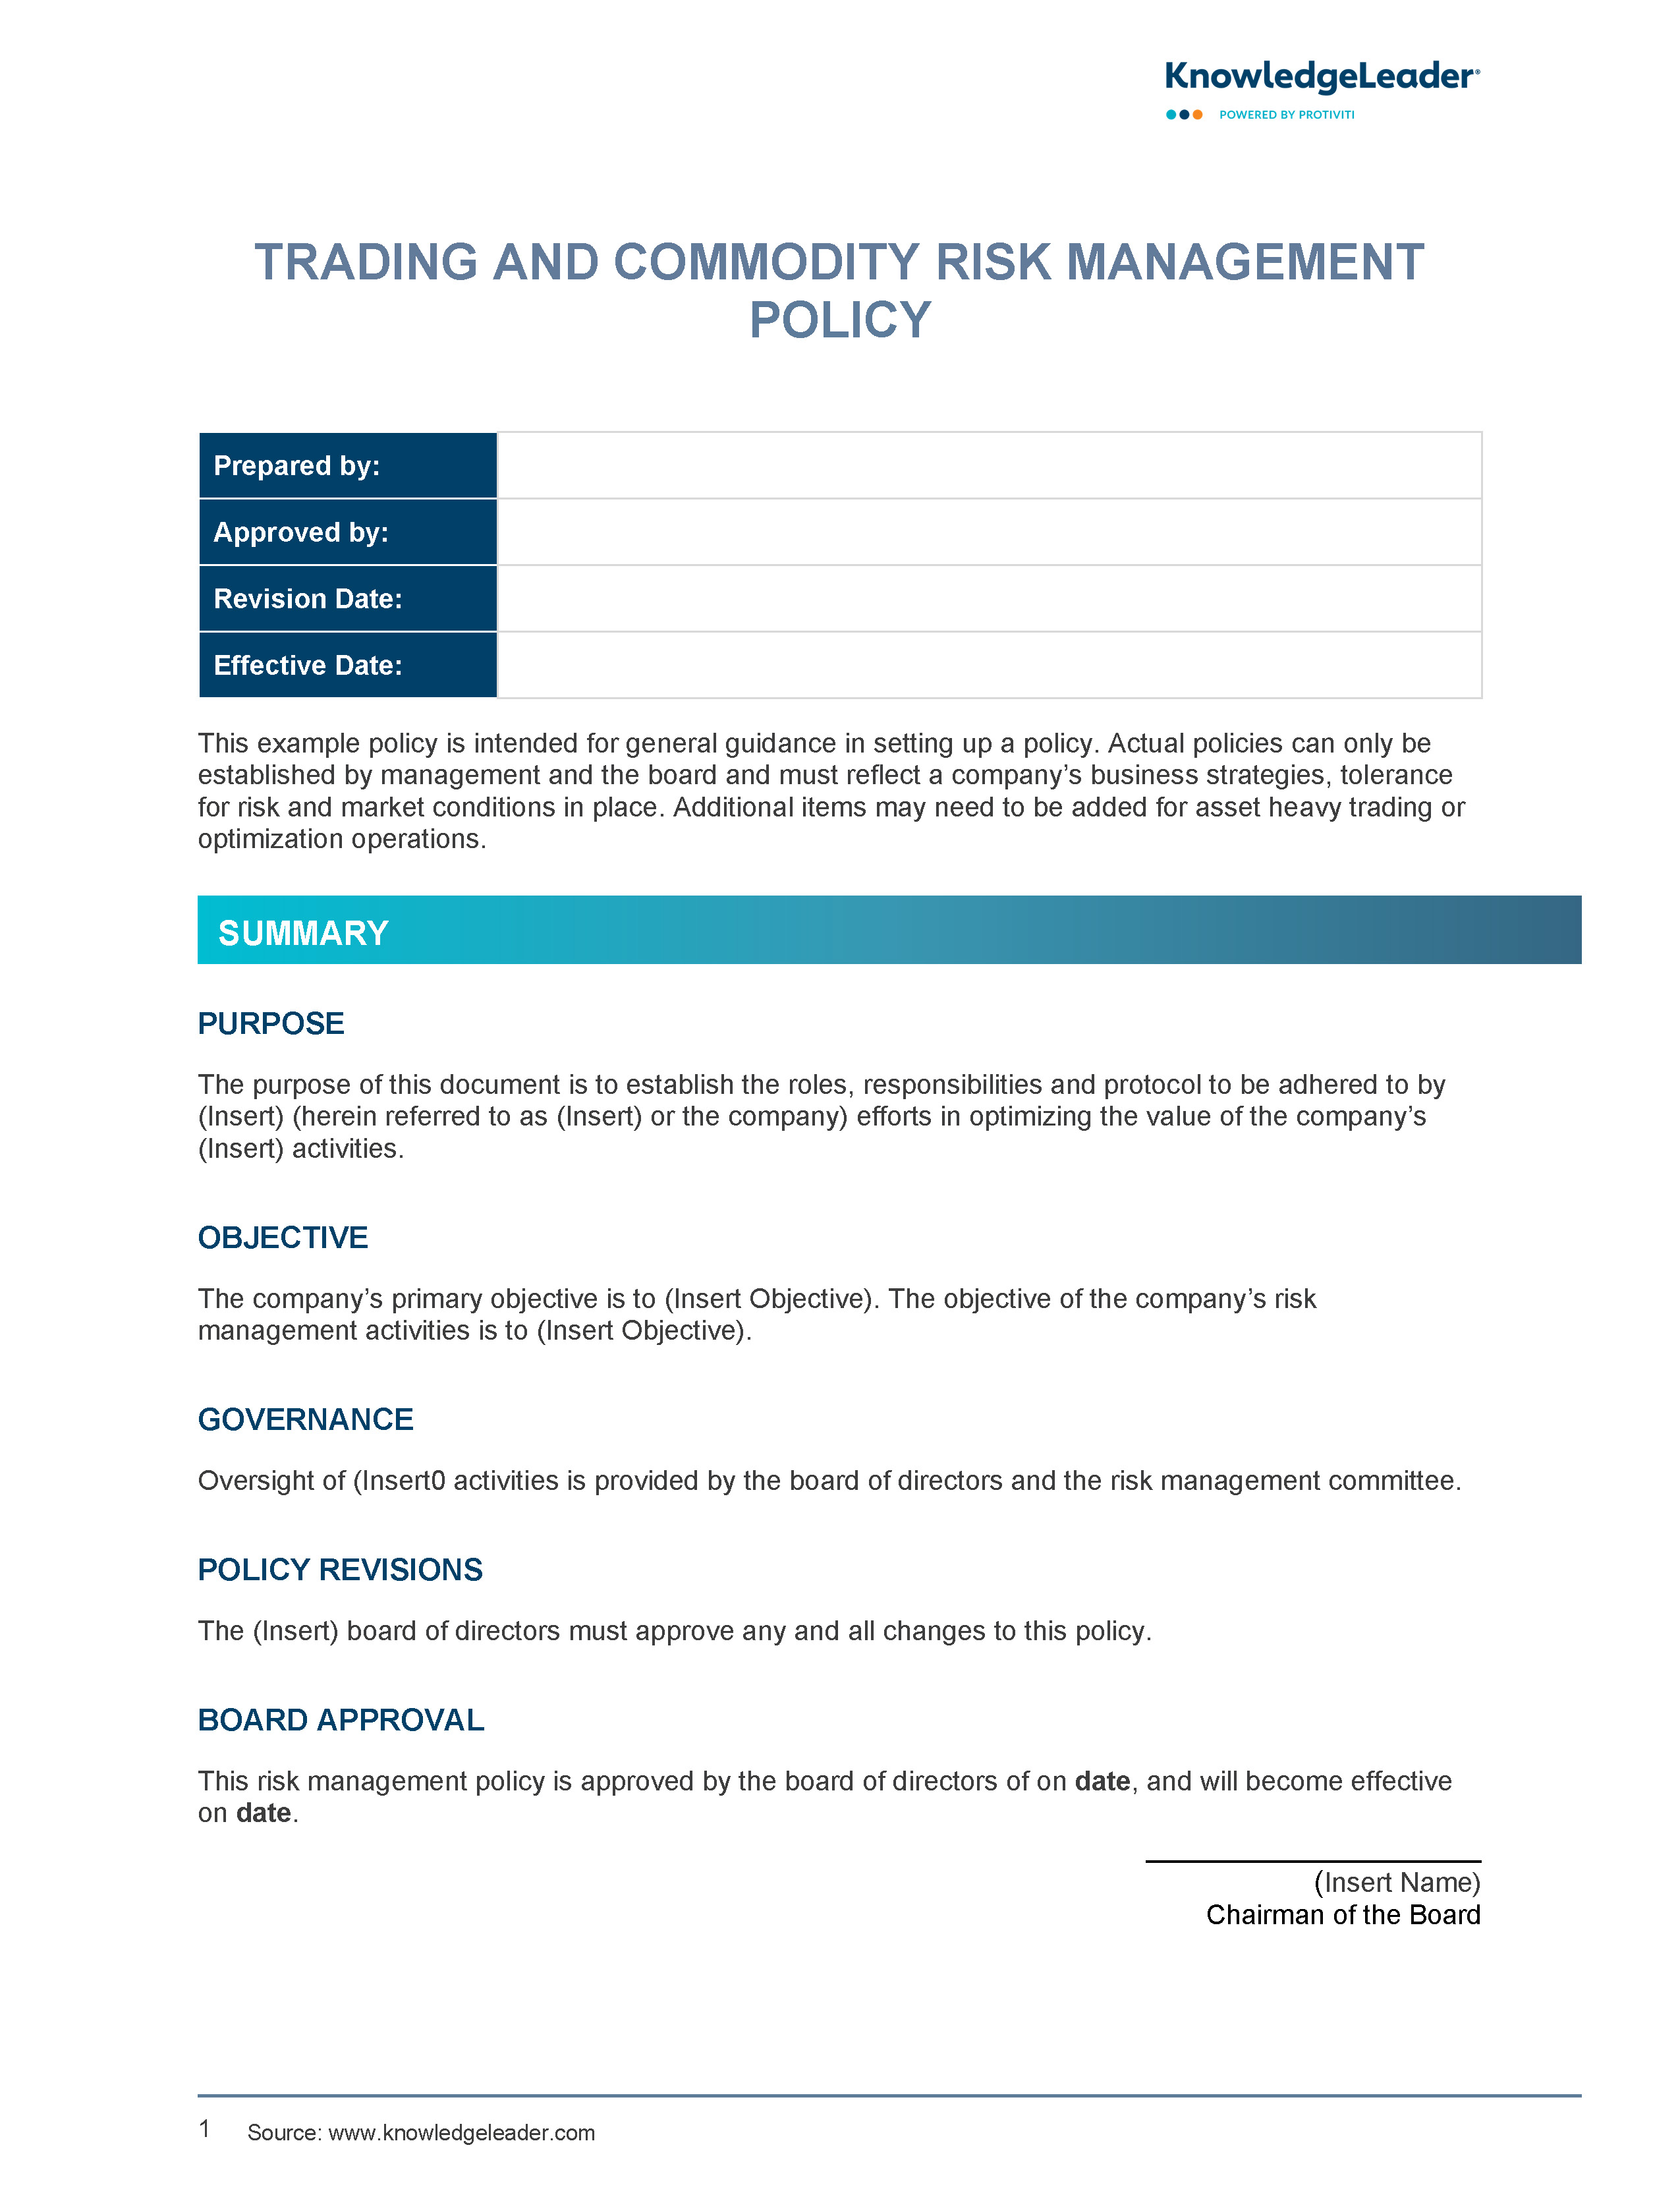 Screenshot of the first page of Trading and Commodity Risk Management Policy